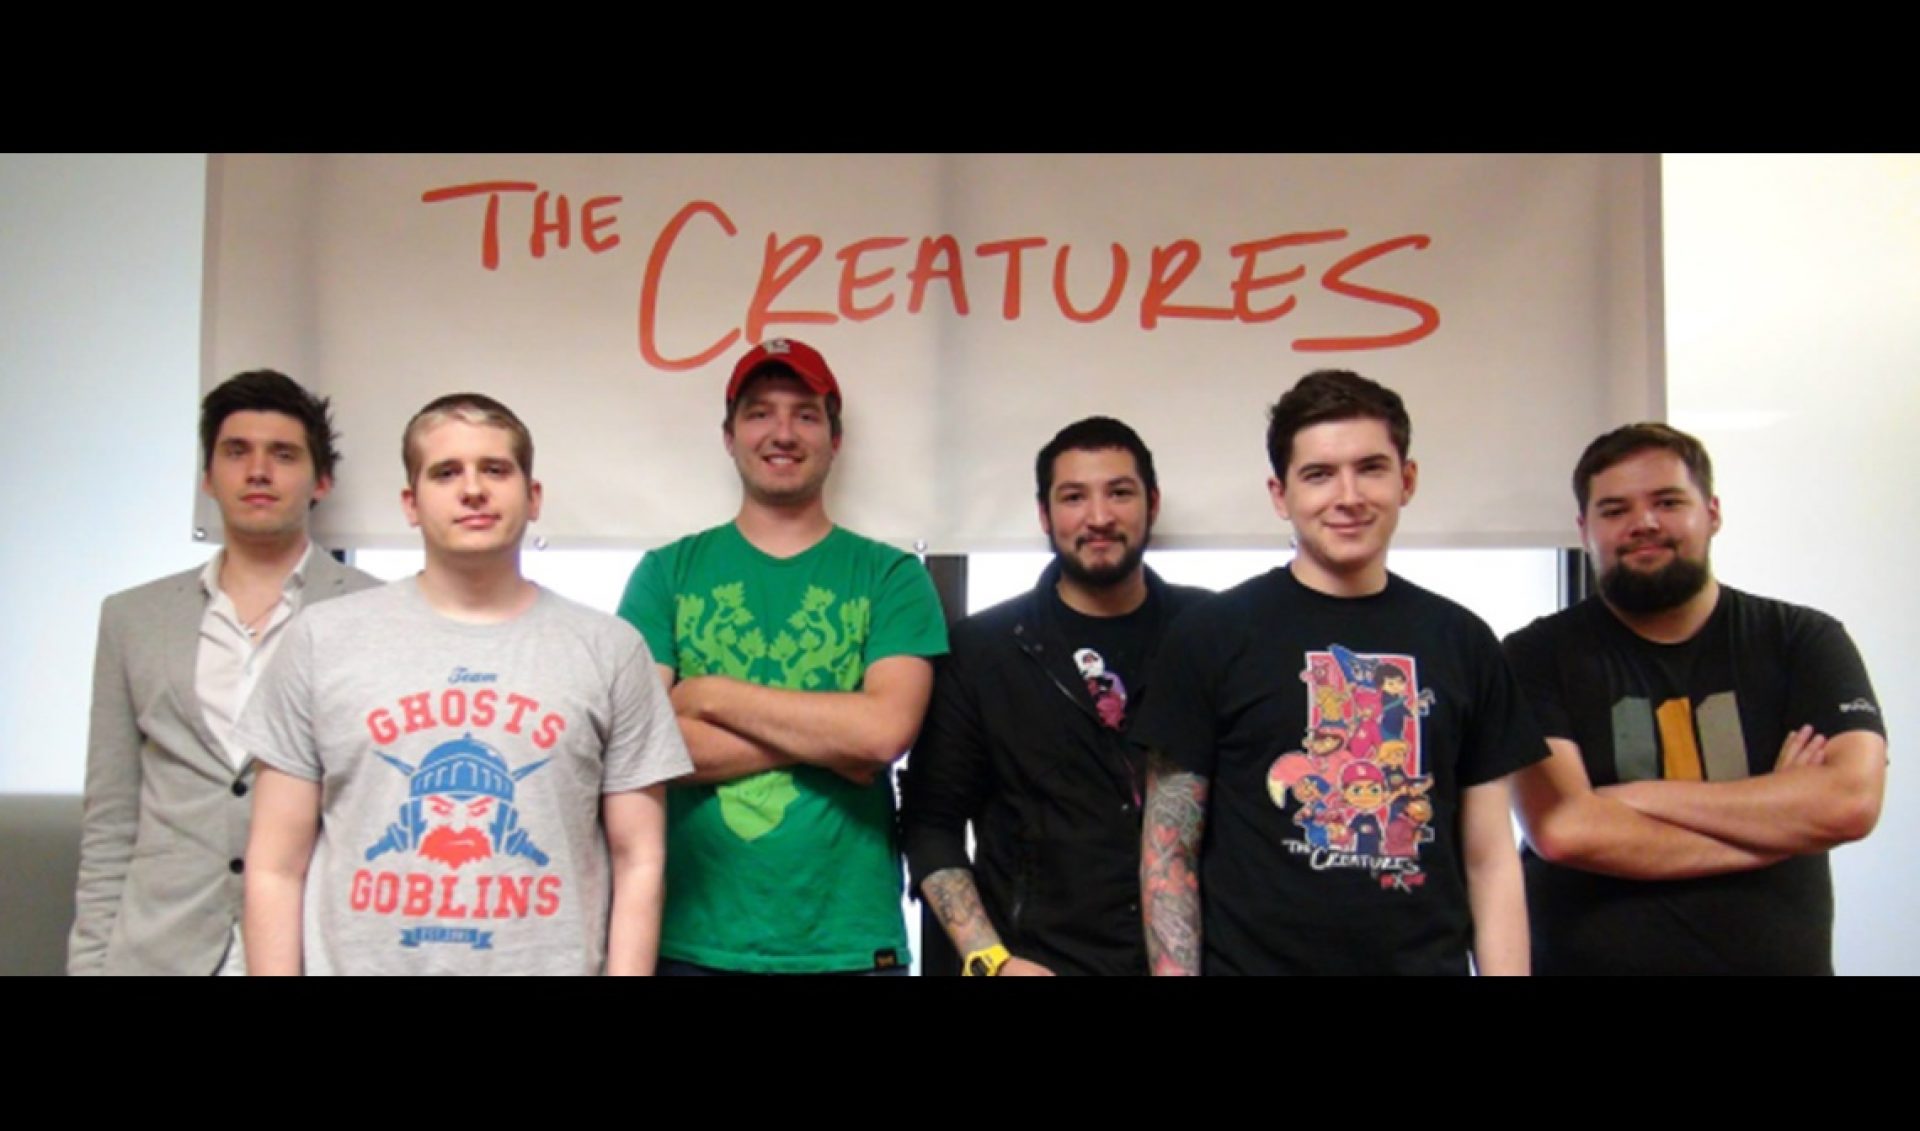 YouTube Millionaires: “Creative Minds” Meet At The Creature Hub